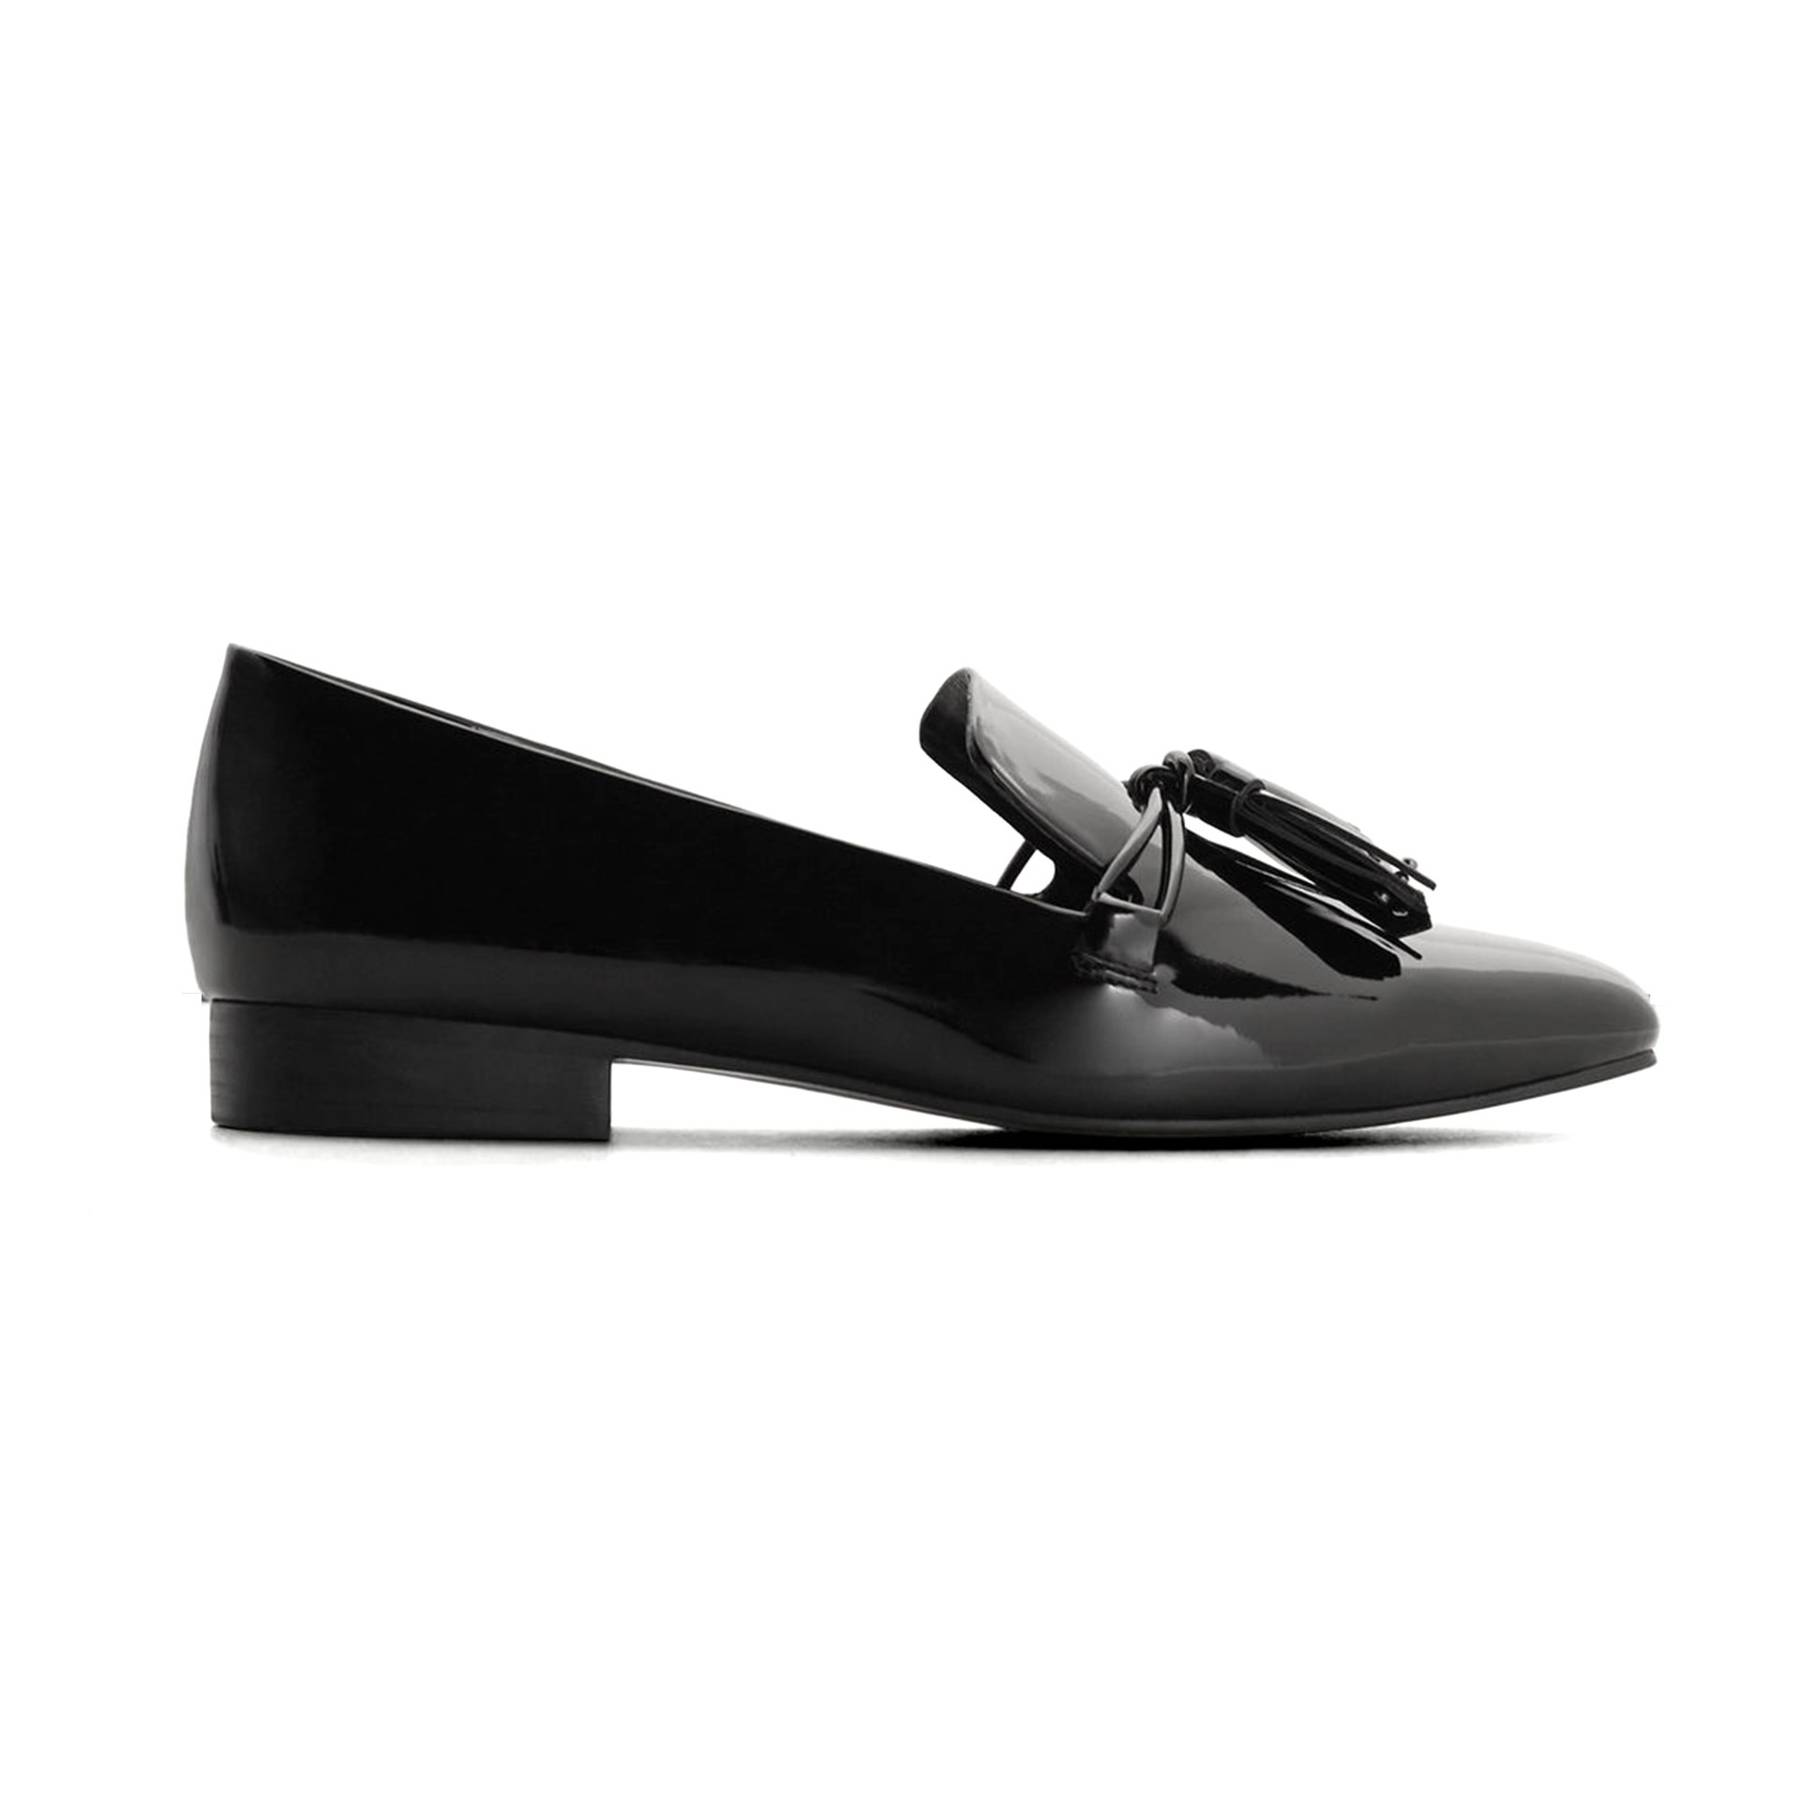 Loafers for women 2016 | Glamour UK